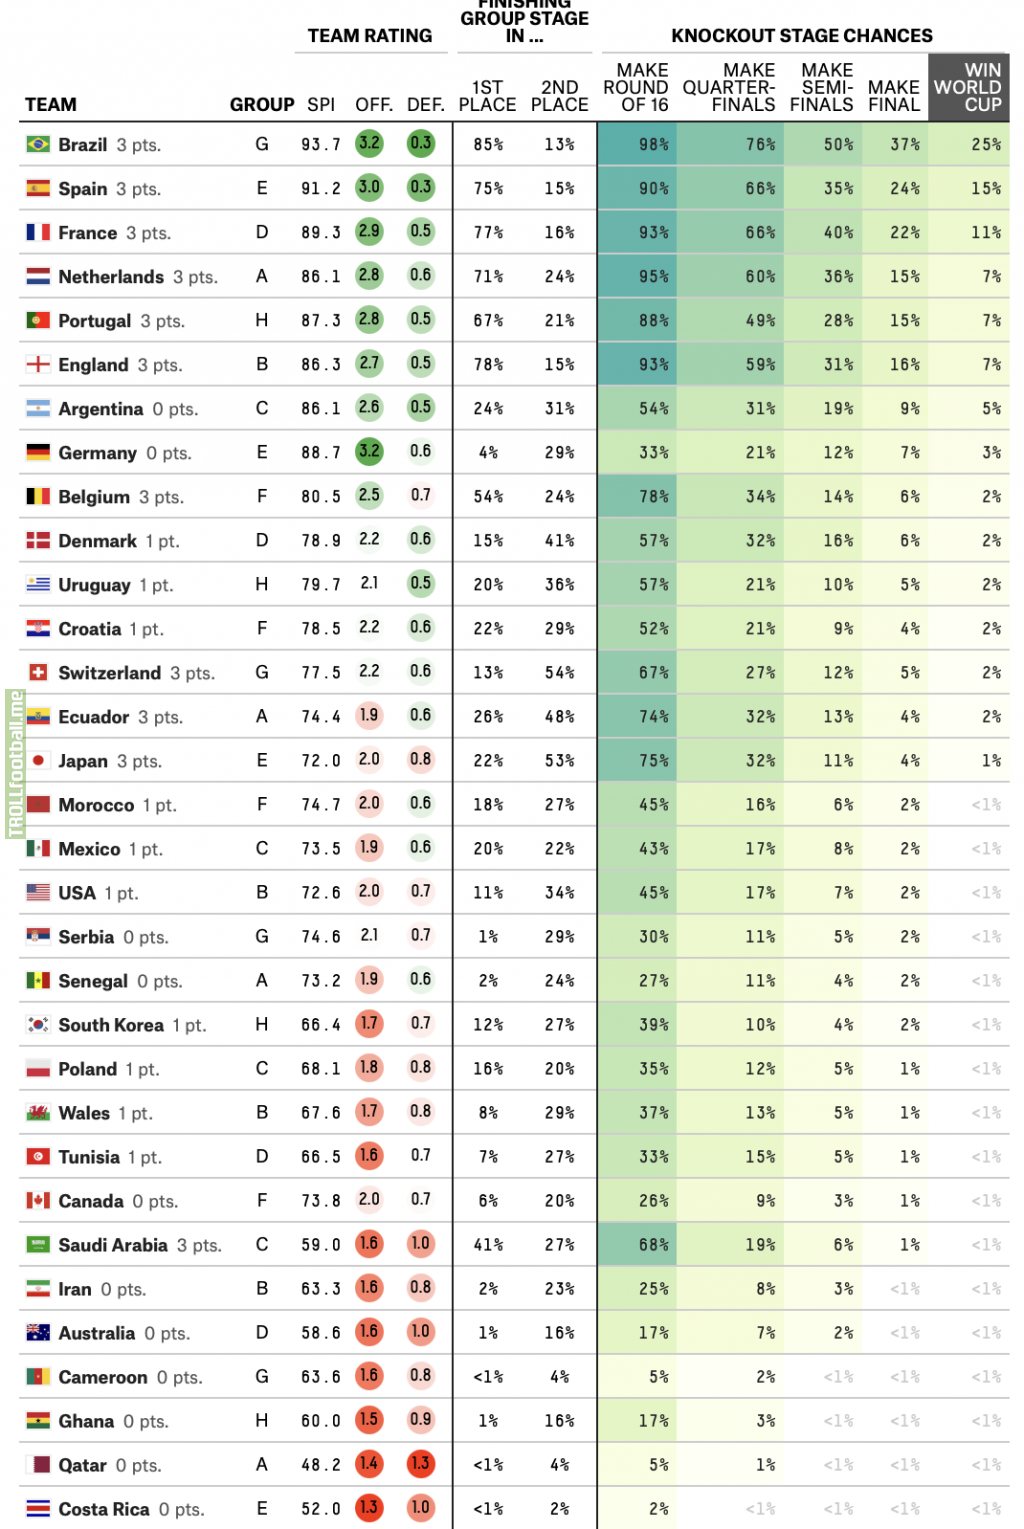 FiveThirtyEight's updated World Cup predictions after the first slate